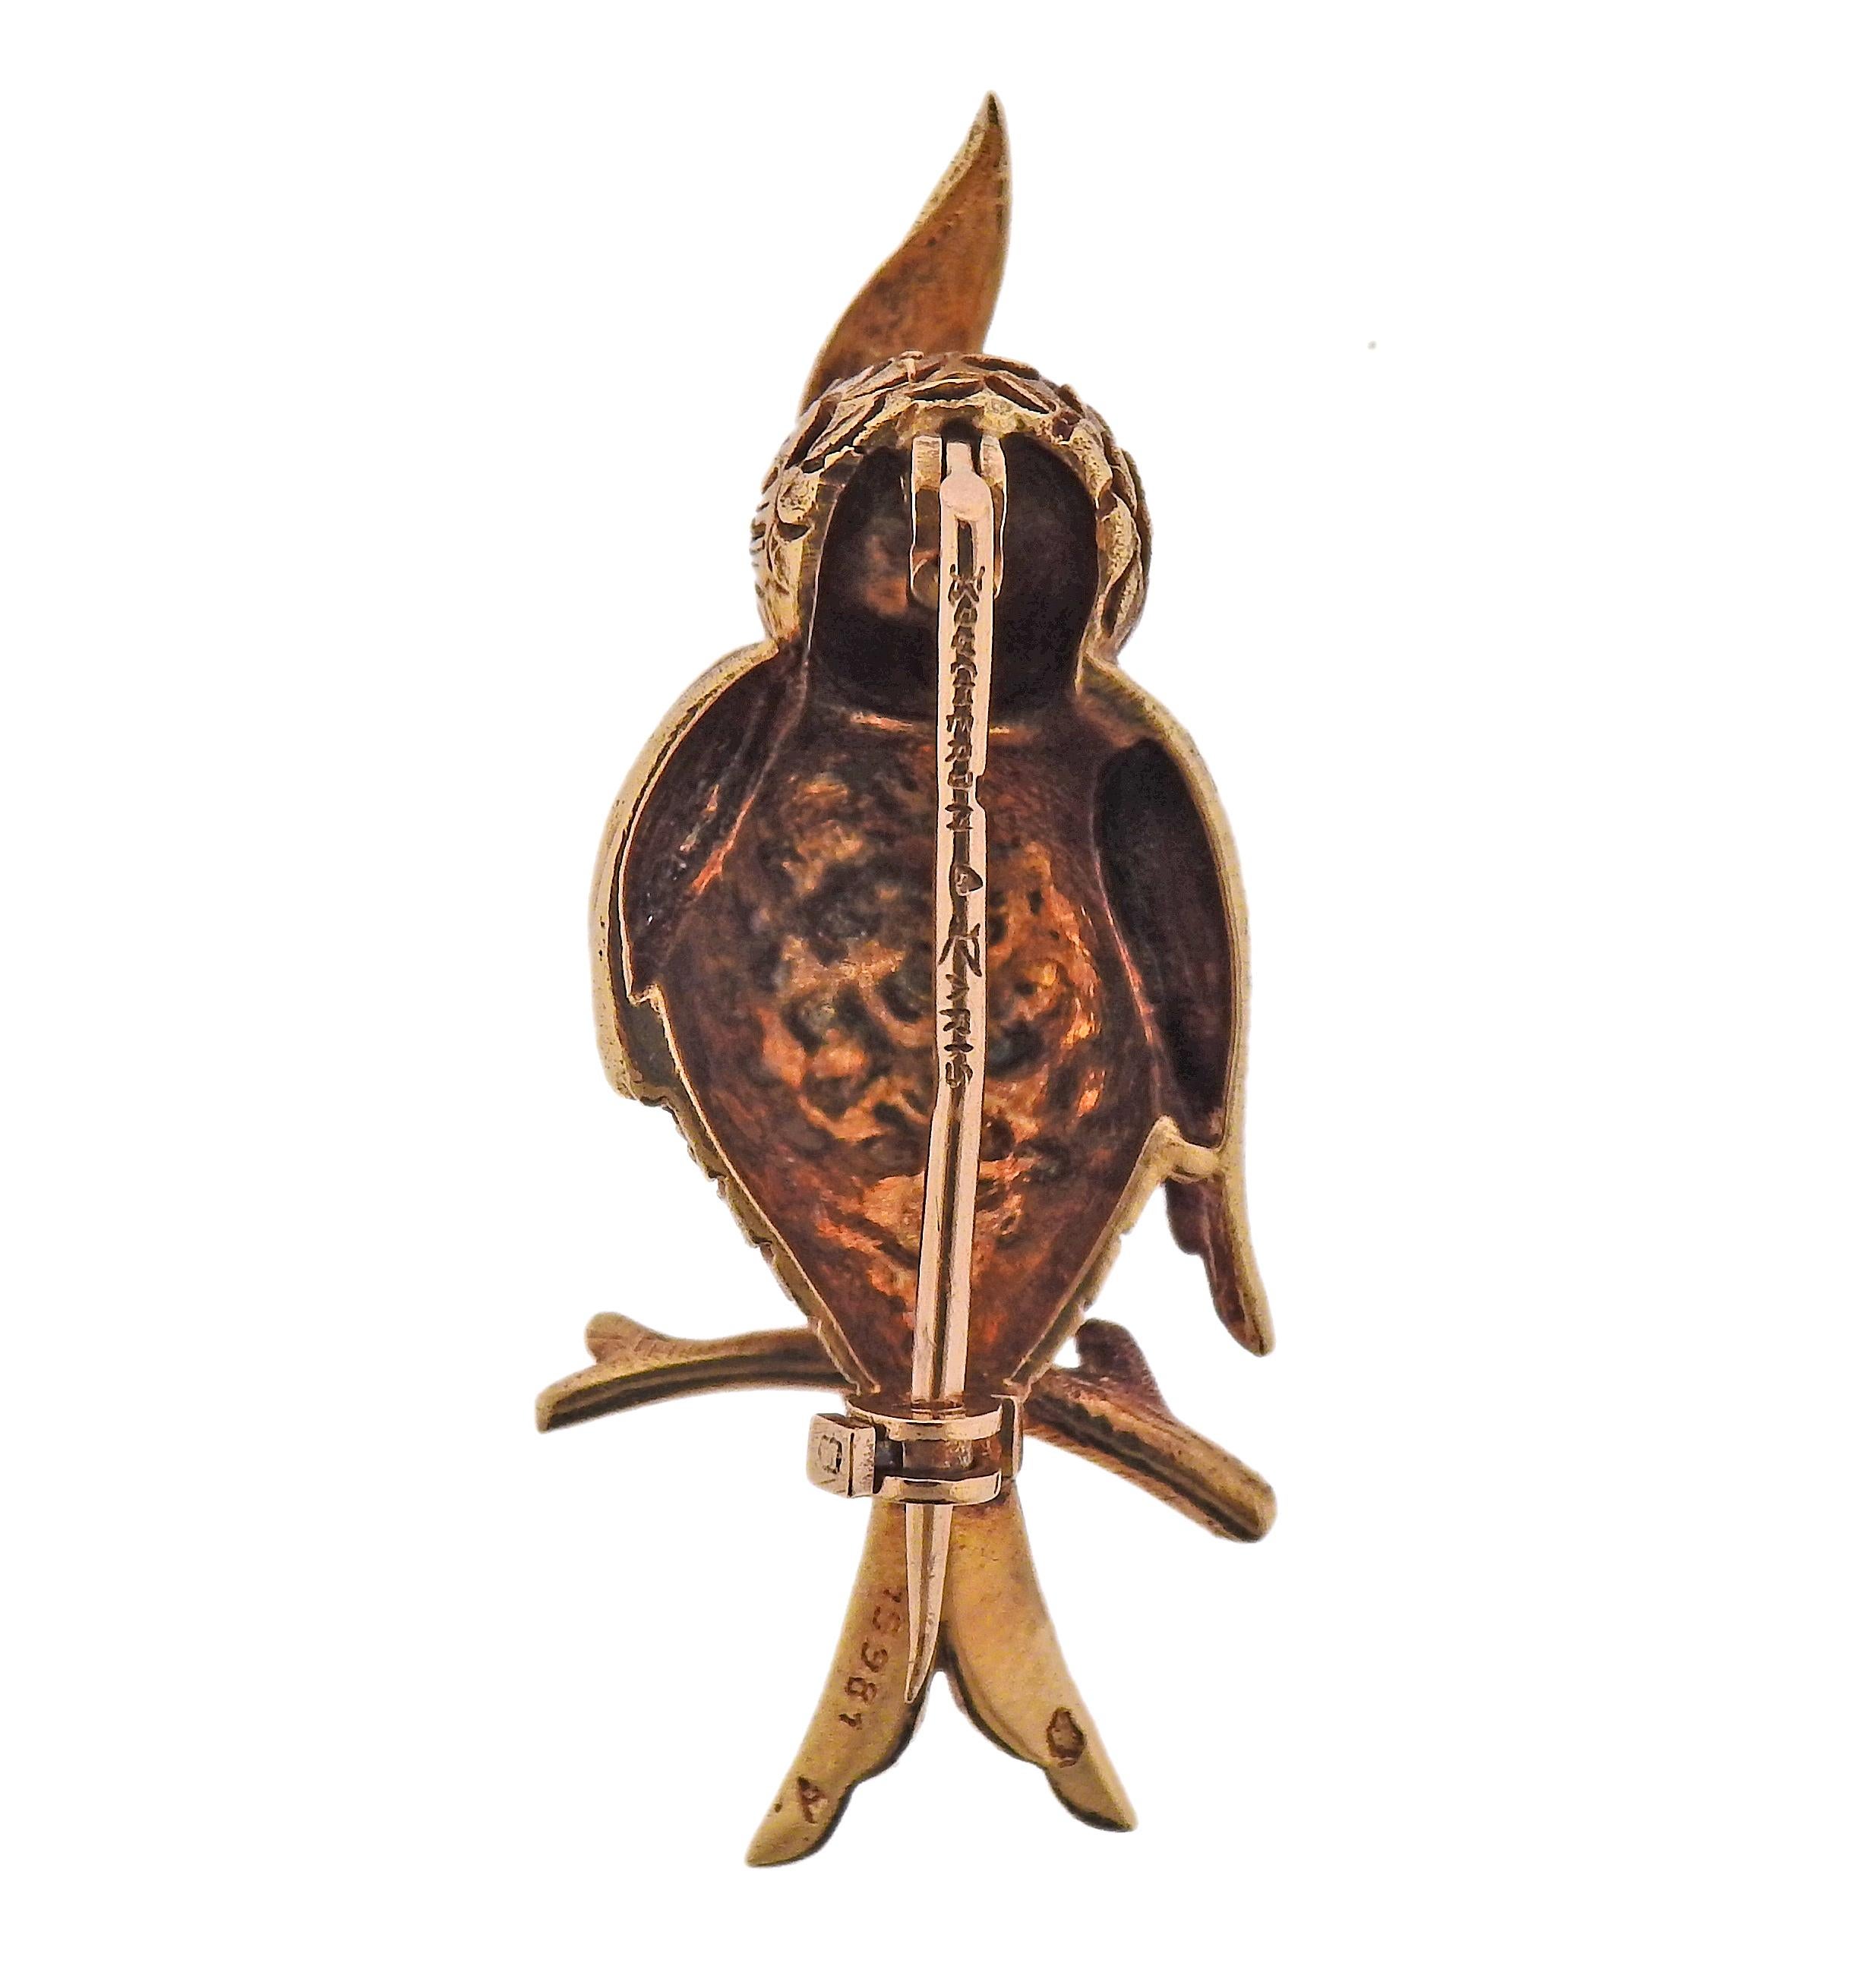 18k yellow gold owl brooch, by Boucheron Paris, with ruby eyes. Brooch is 40mm x 16mm. Marked: Boucheron Paris., 15981, French mark. Weight - 7.5 grams. 